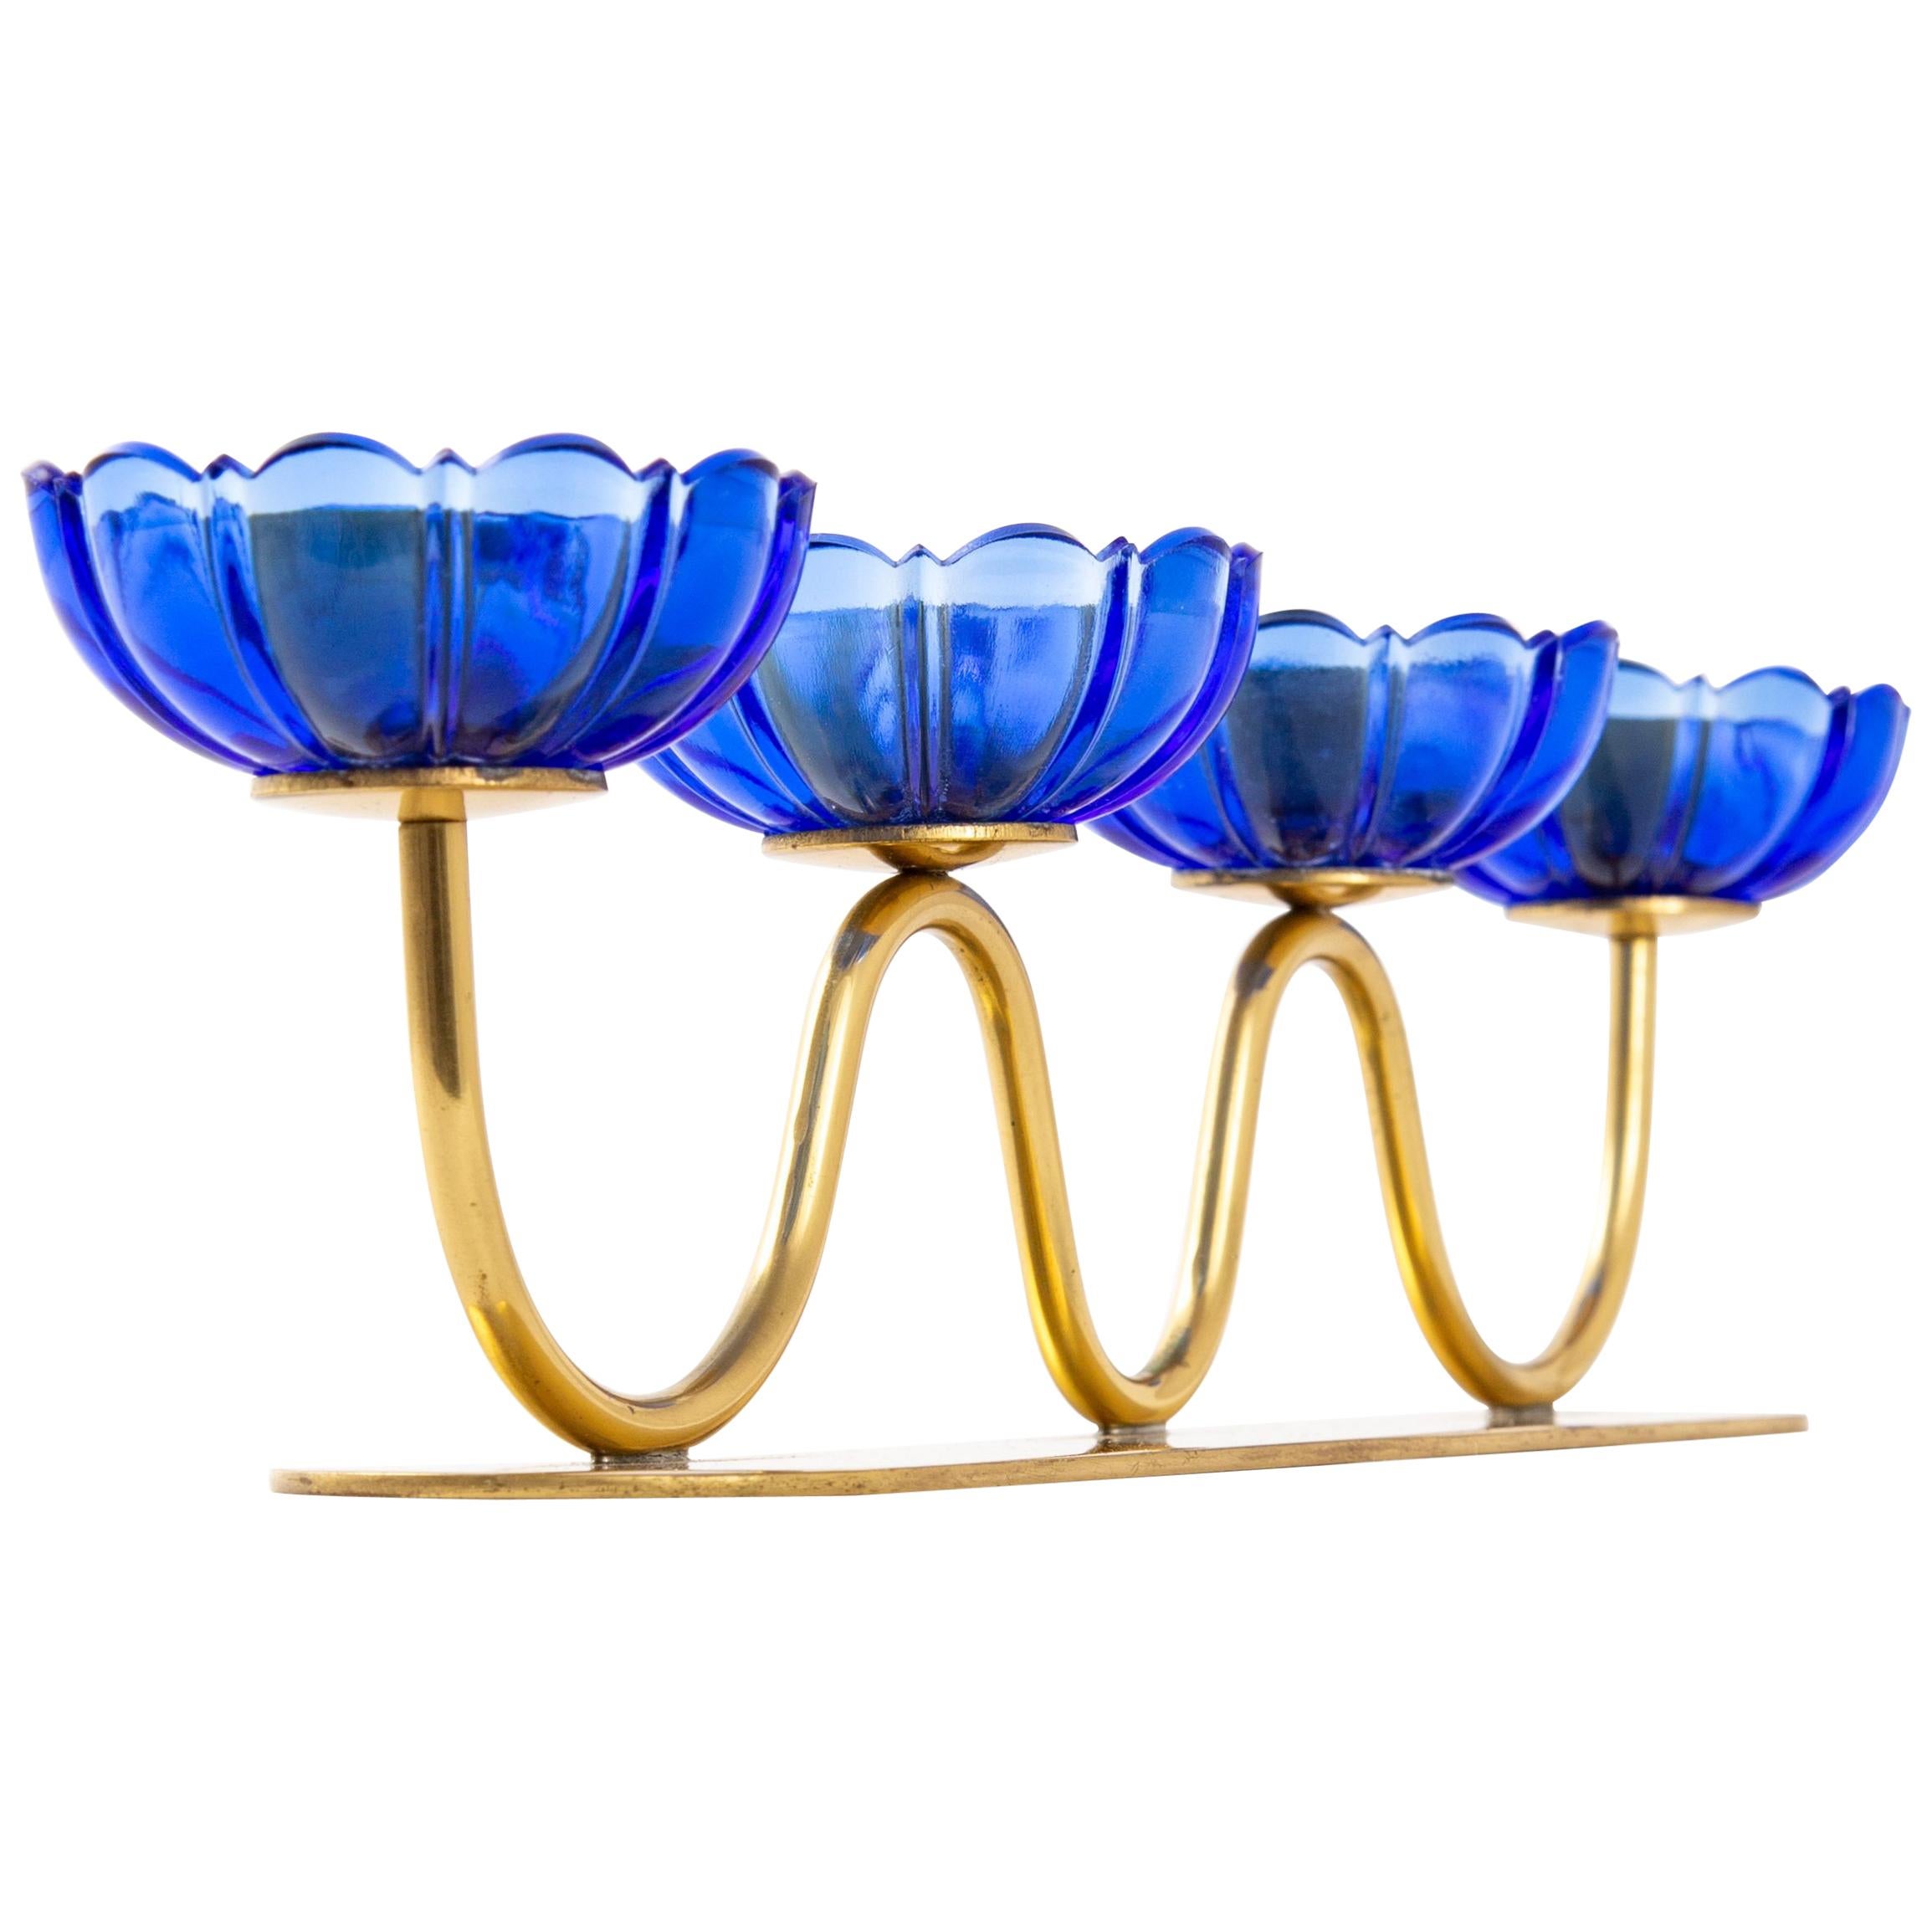 Gunnar Ander Candleholders Sweden for Ystad Metall, Blue Flower with Brass For Sale